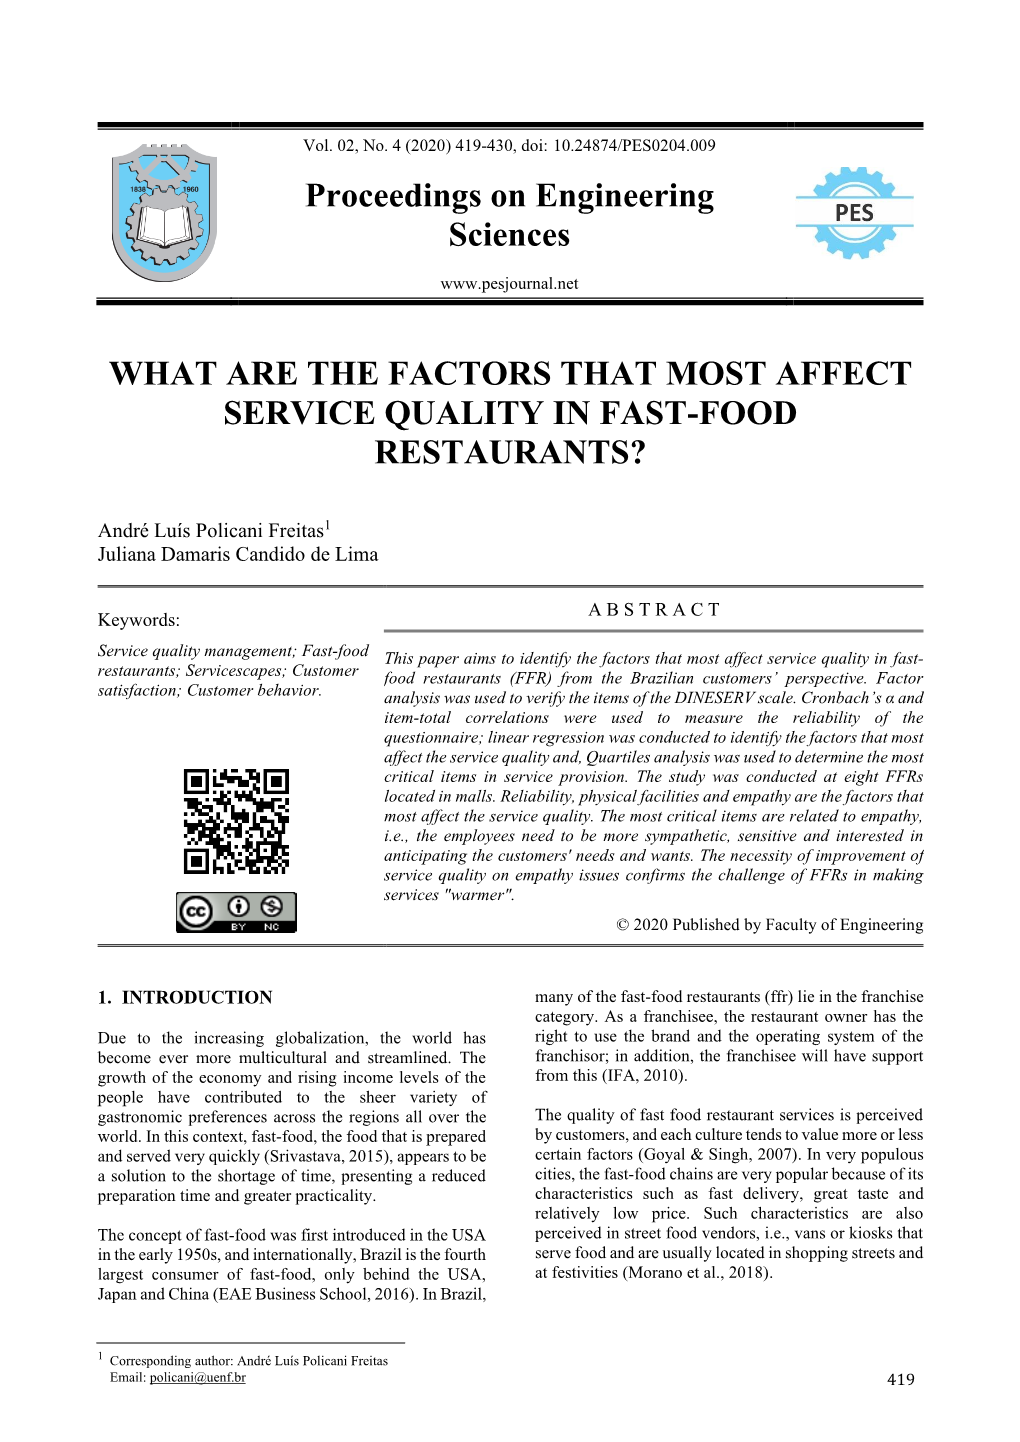 What Are the Factors That Most Affect Service Quality in Fast-Food Restaurants?